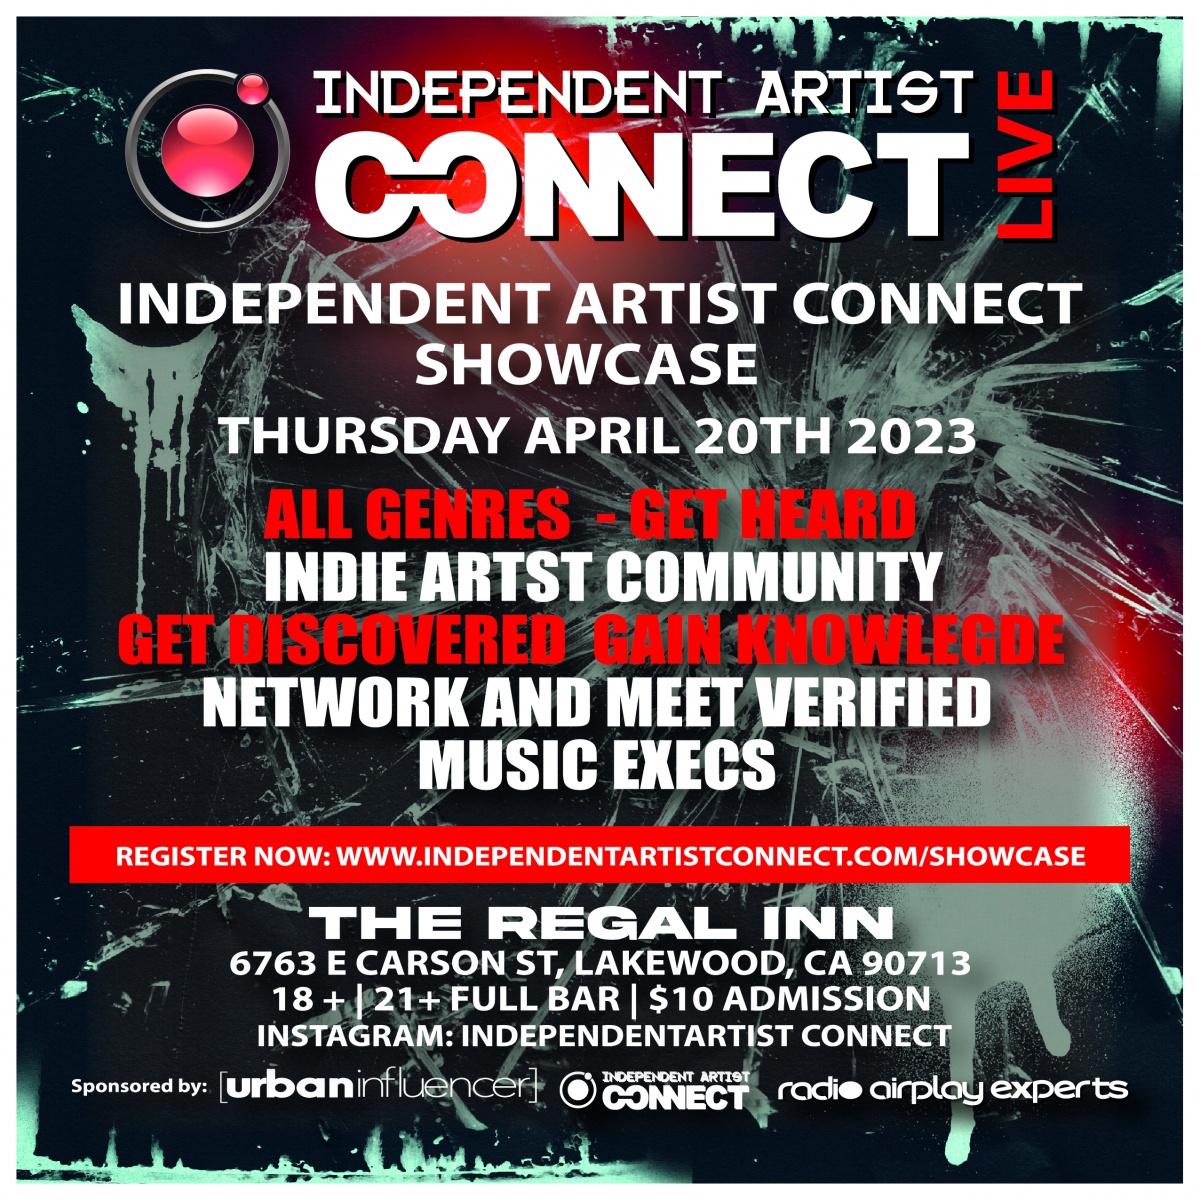 Event: INDEPENDENT ARTIST CONNECT SHOWCASE